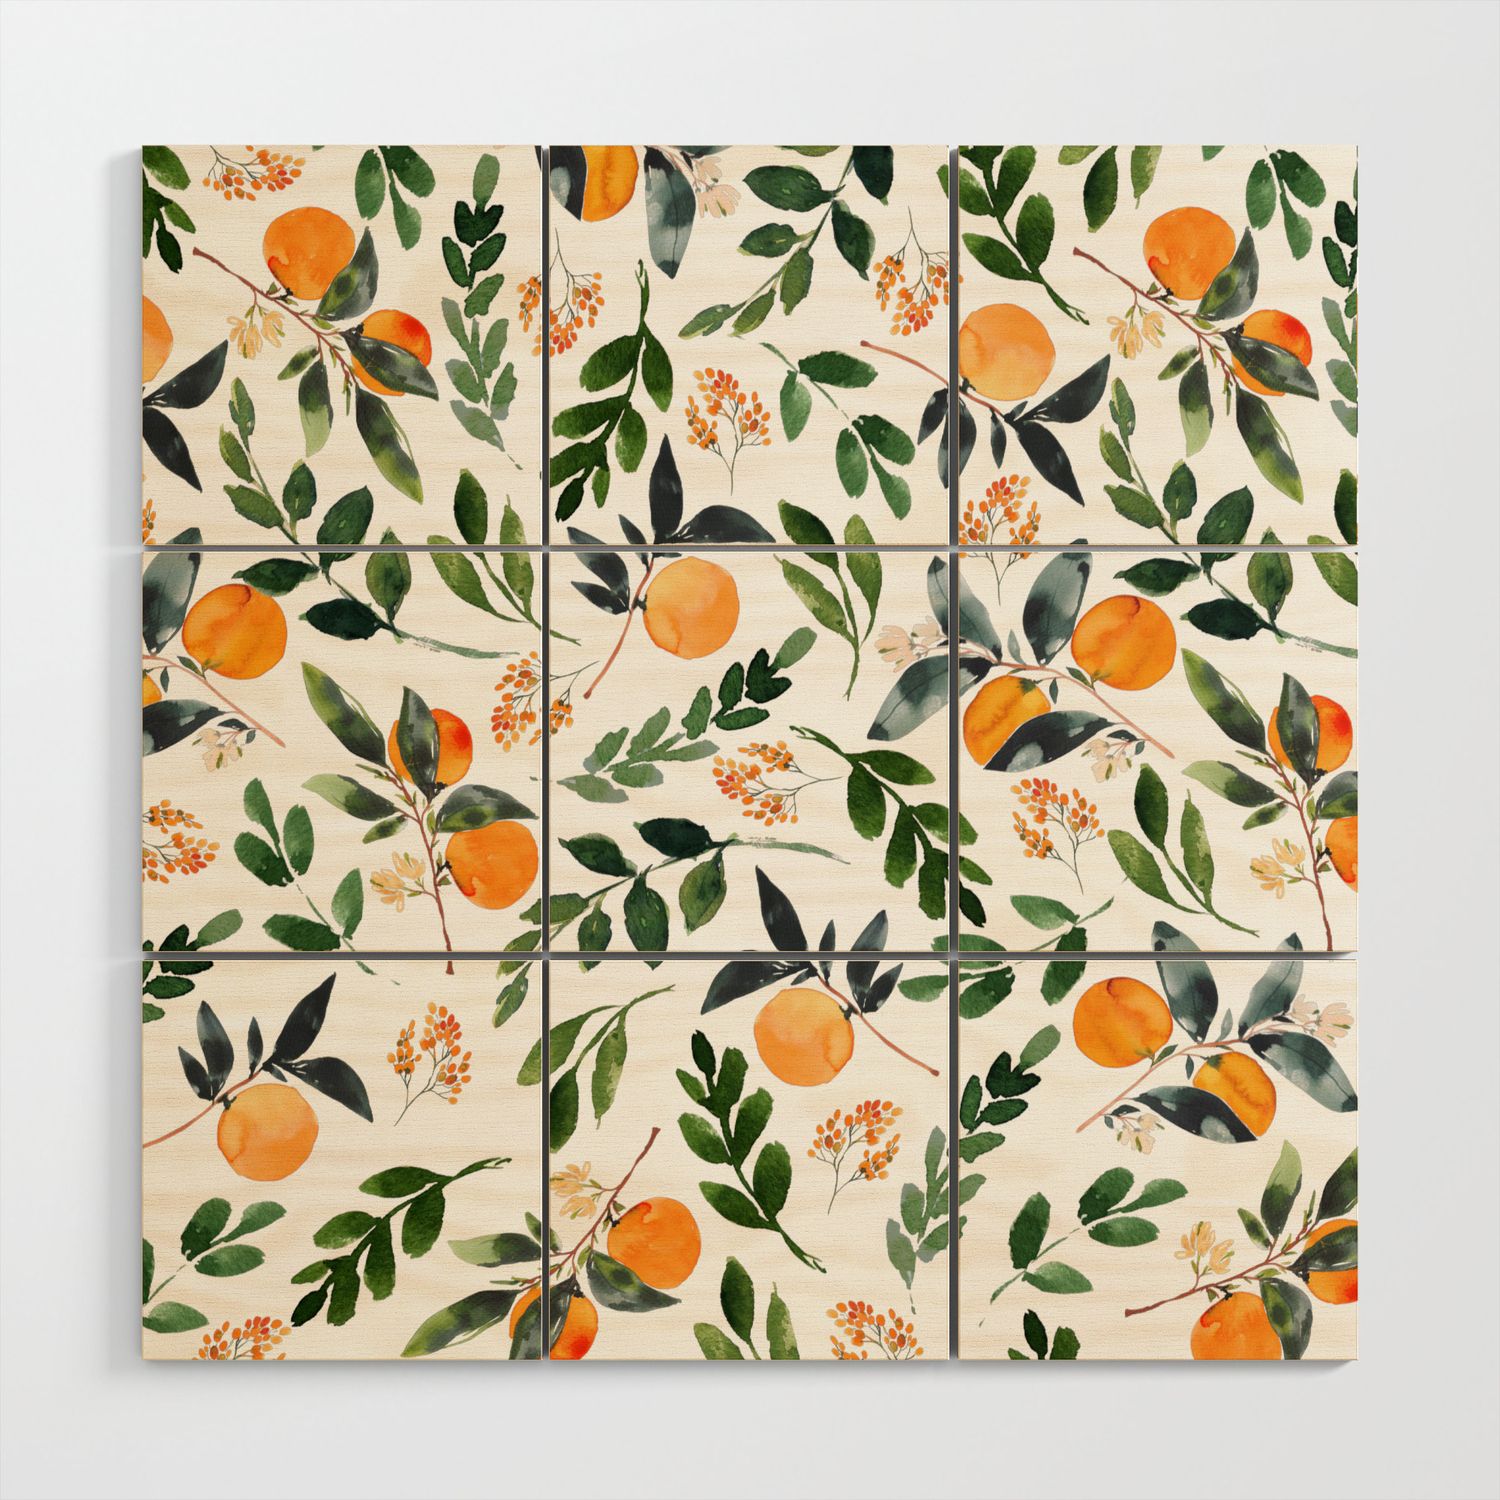 Orange Grove Wood Wall Artlizzy Powers Design | Society6 Intended For Orange Grove Wall Art (View 8 of 15)